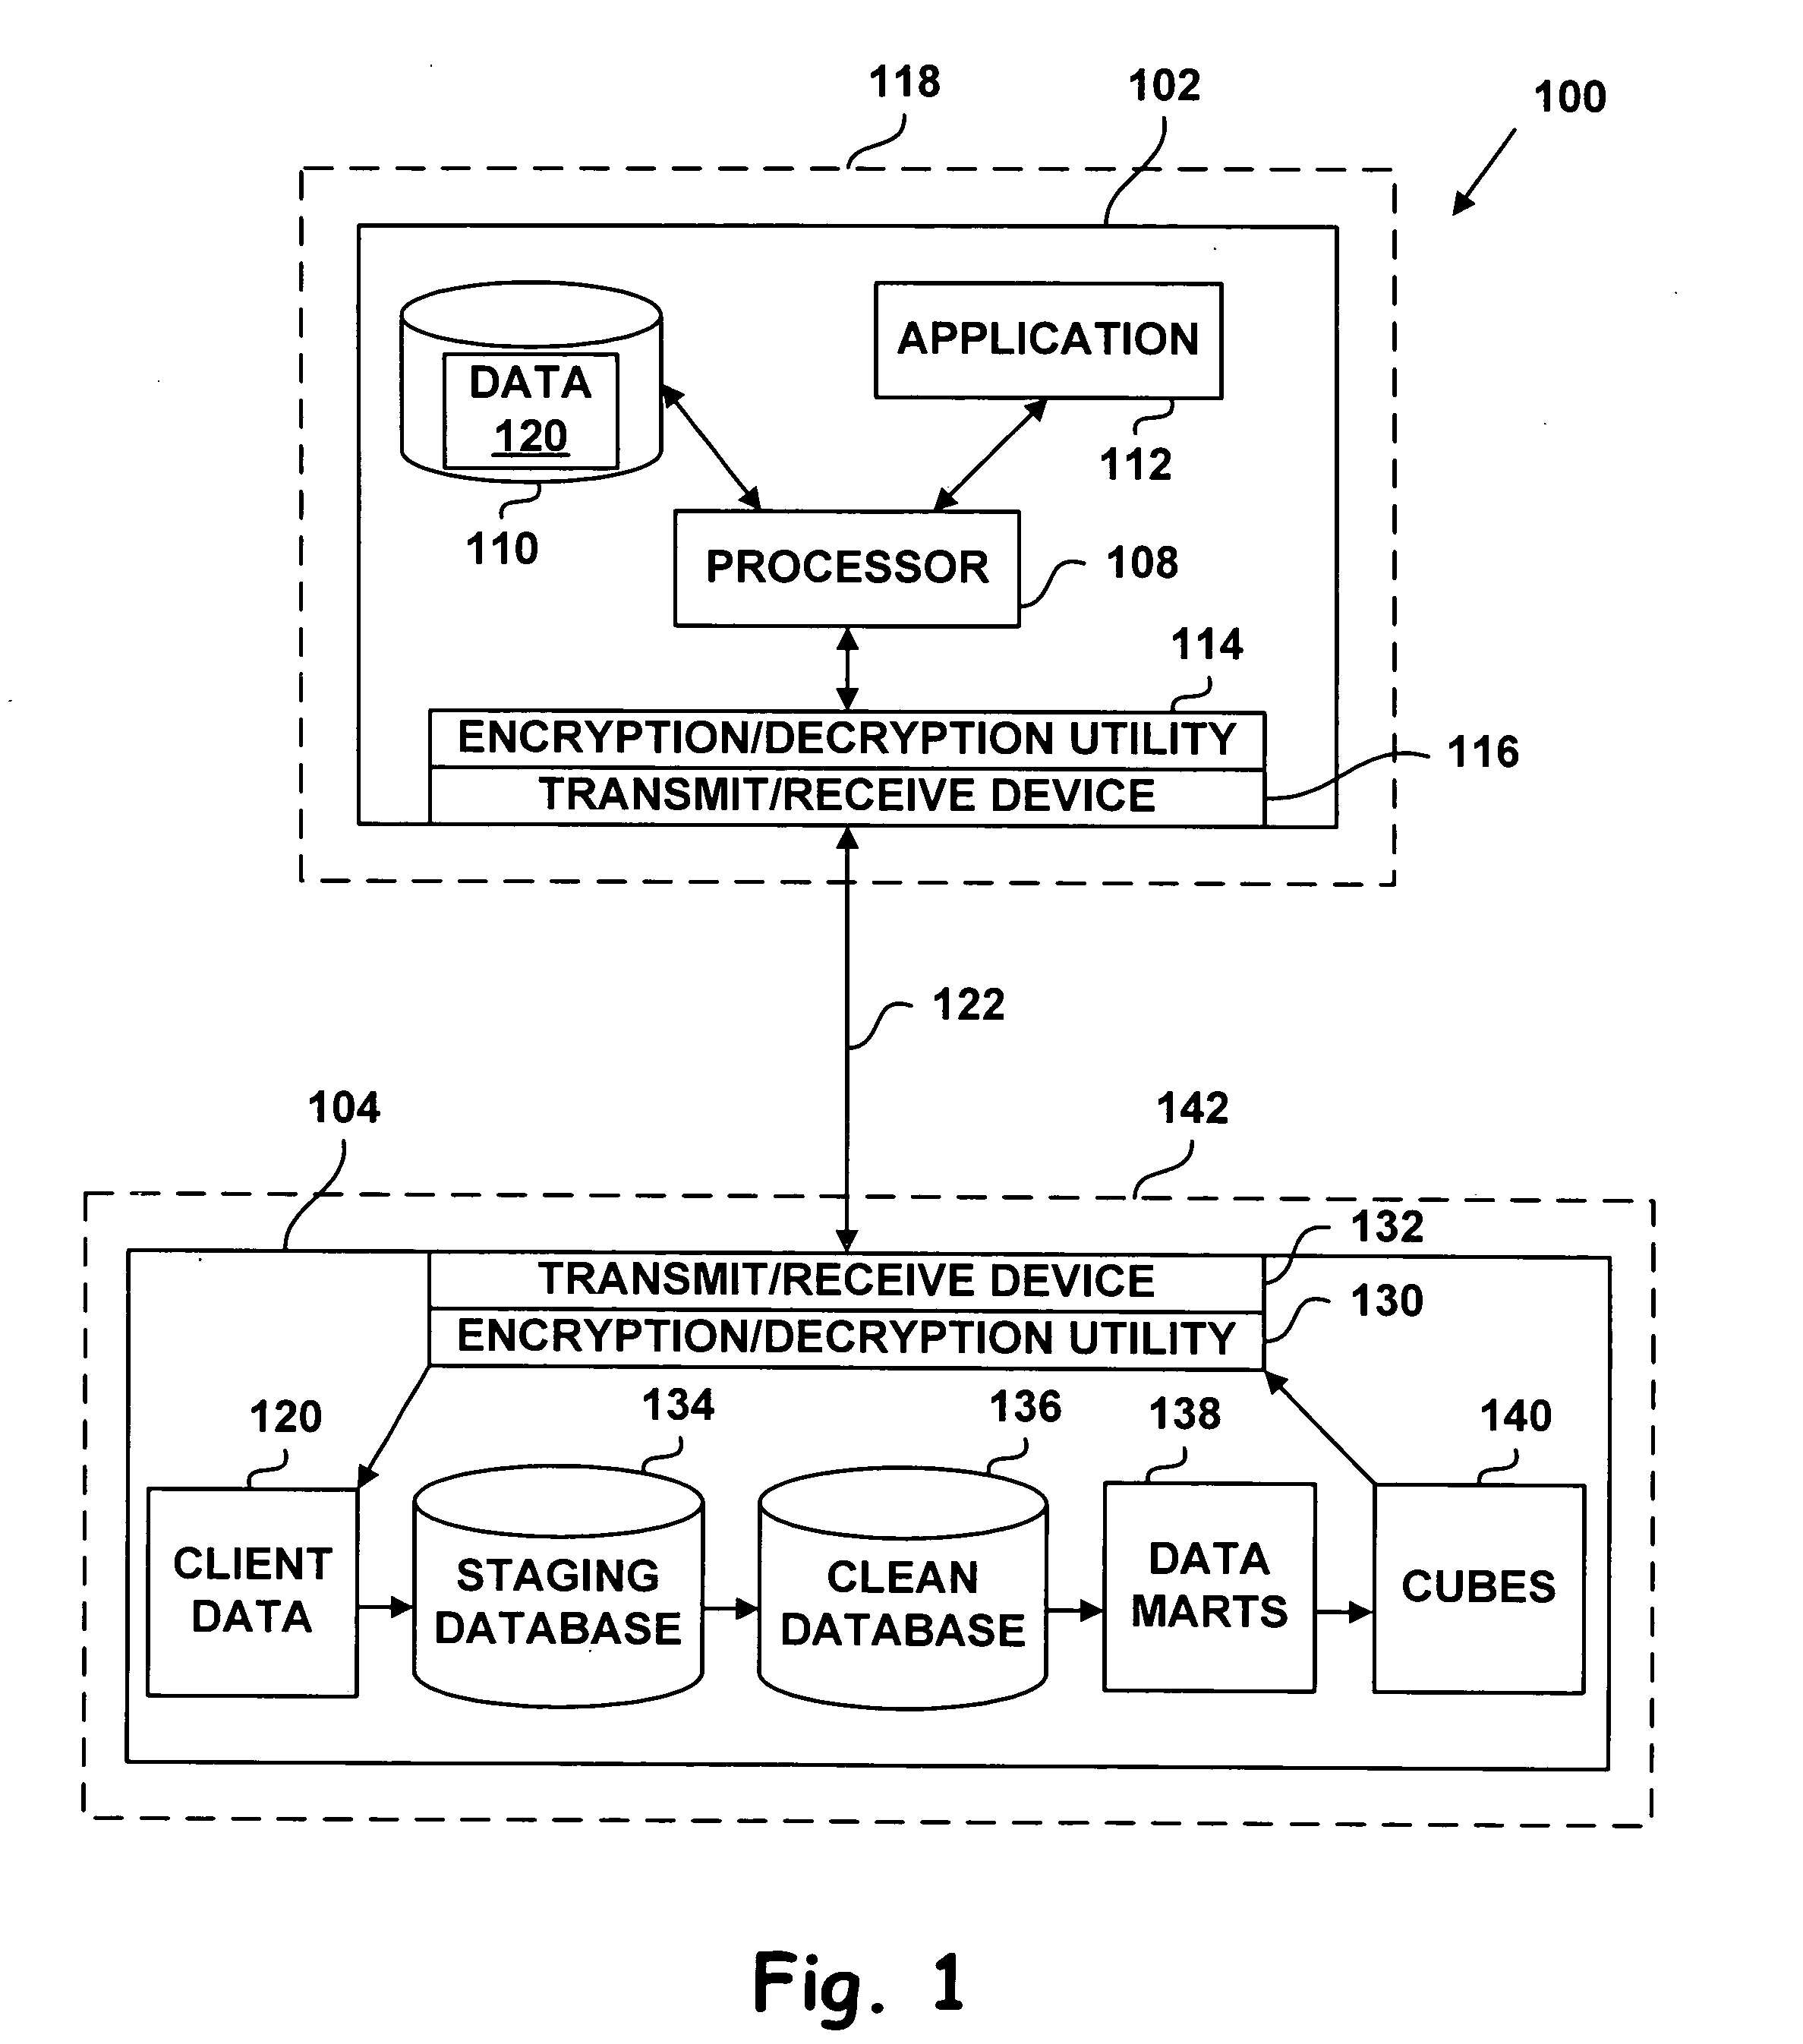 System and method for providing remote users with reports and analyses based on user data and adaptable reporting with the ability to alter, modify or augment such reports and analyses through web-based technology